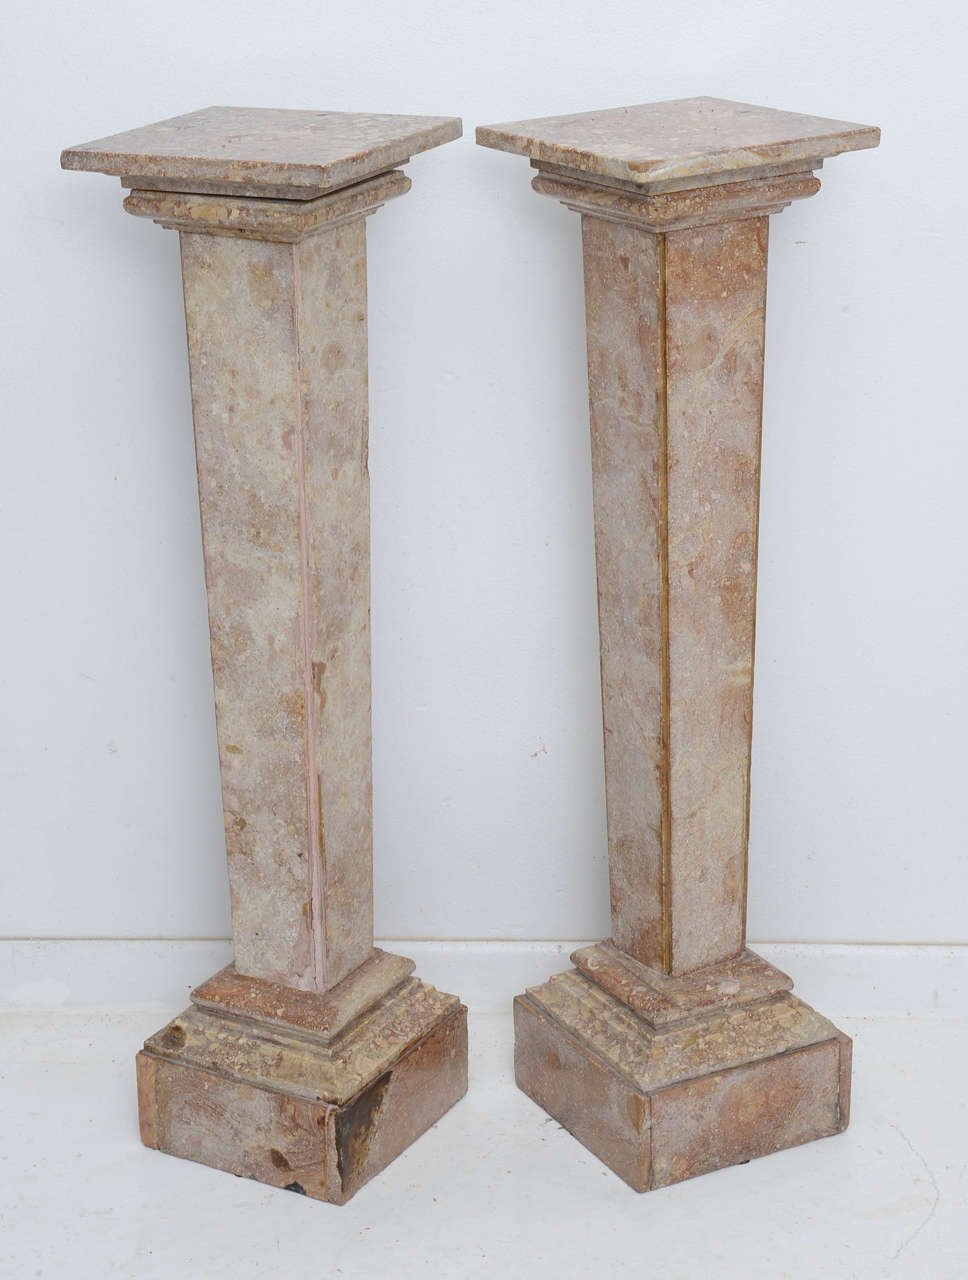 This stylish pair of pedestals are in the clean line of the Louis XVI period and the fossilized marble is subtle in in color and patterns. 

